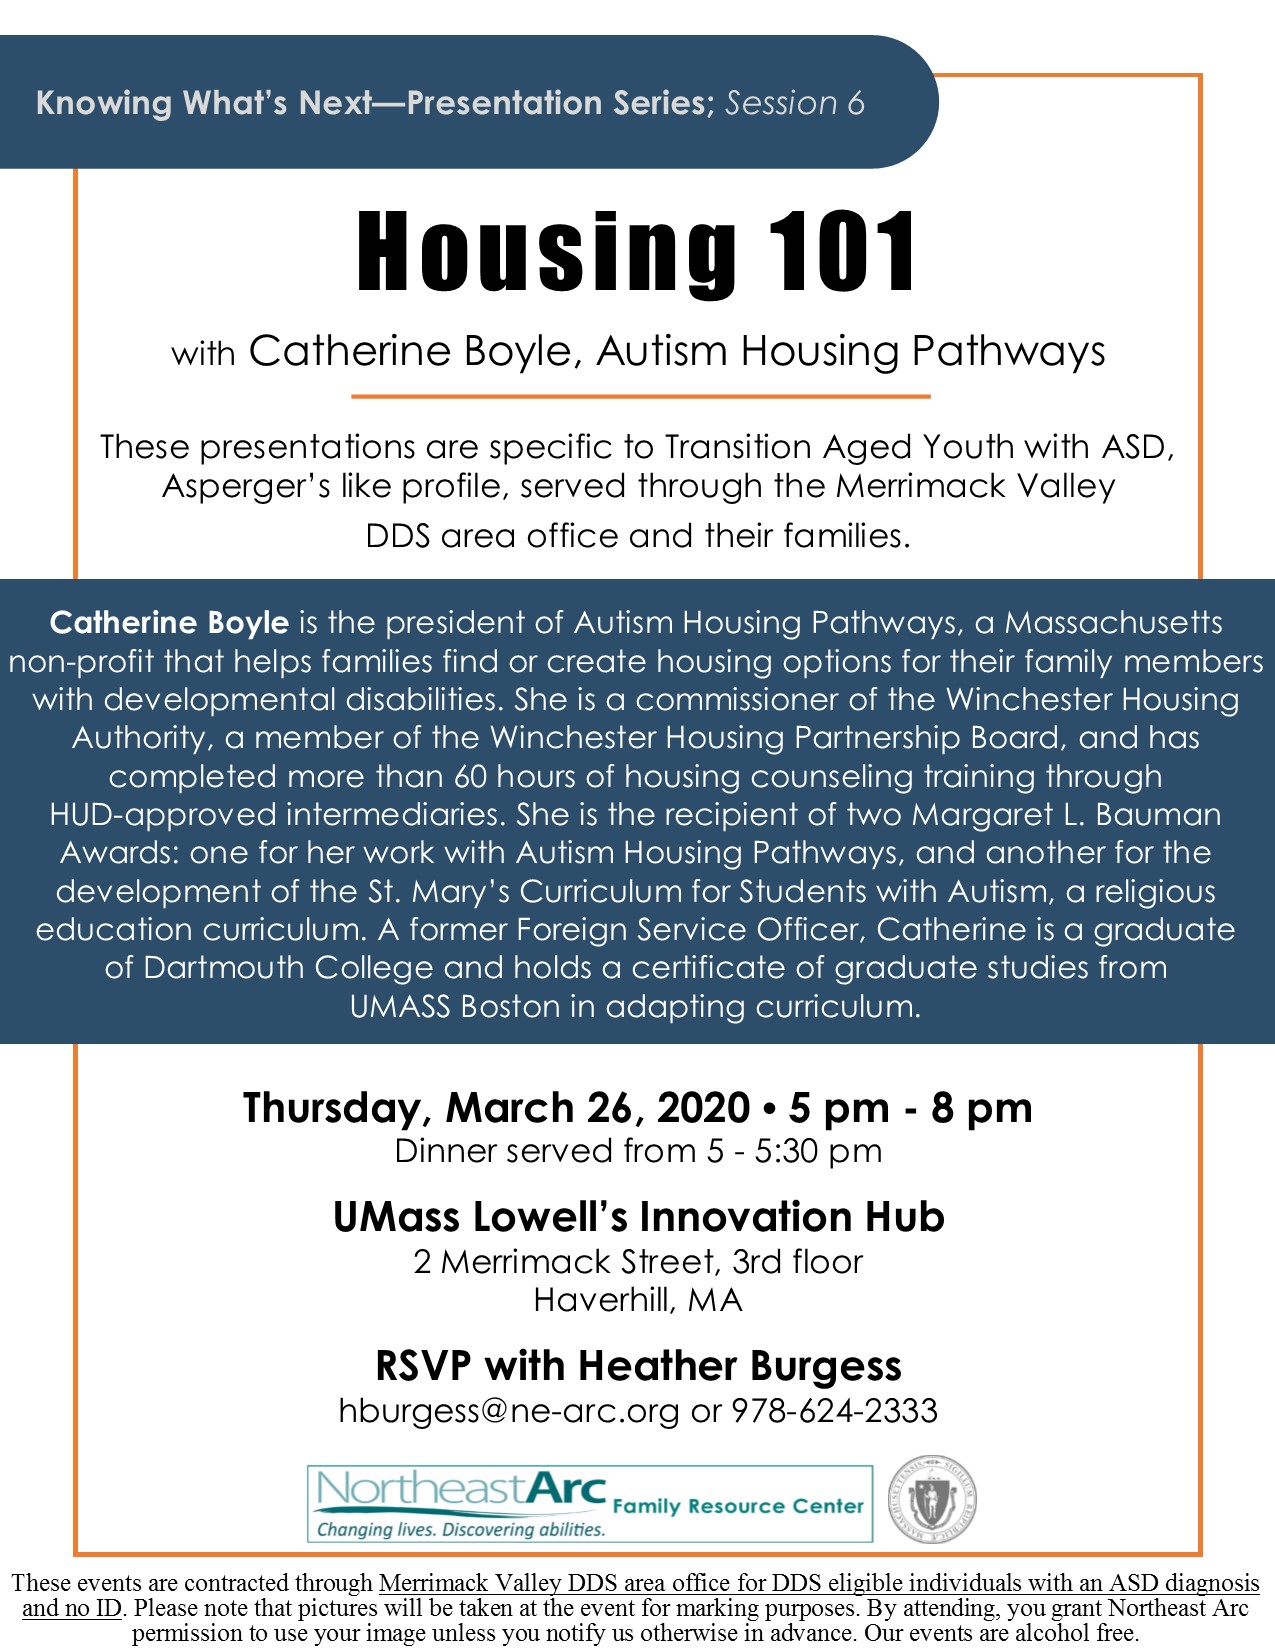 Merrimack Valley Transition Series, Housing 101 with Catherine Boyle, March 26th 5 pm, 2 Merrimack Street Haverhill MA, RSVP with Heather Burgess hburgess@ne-arc.org or 978-624-2333